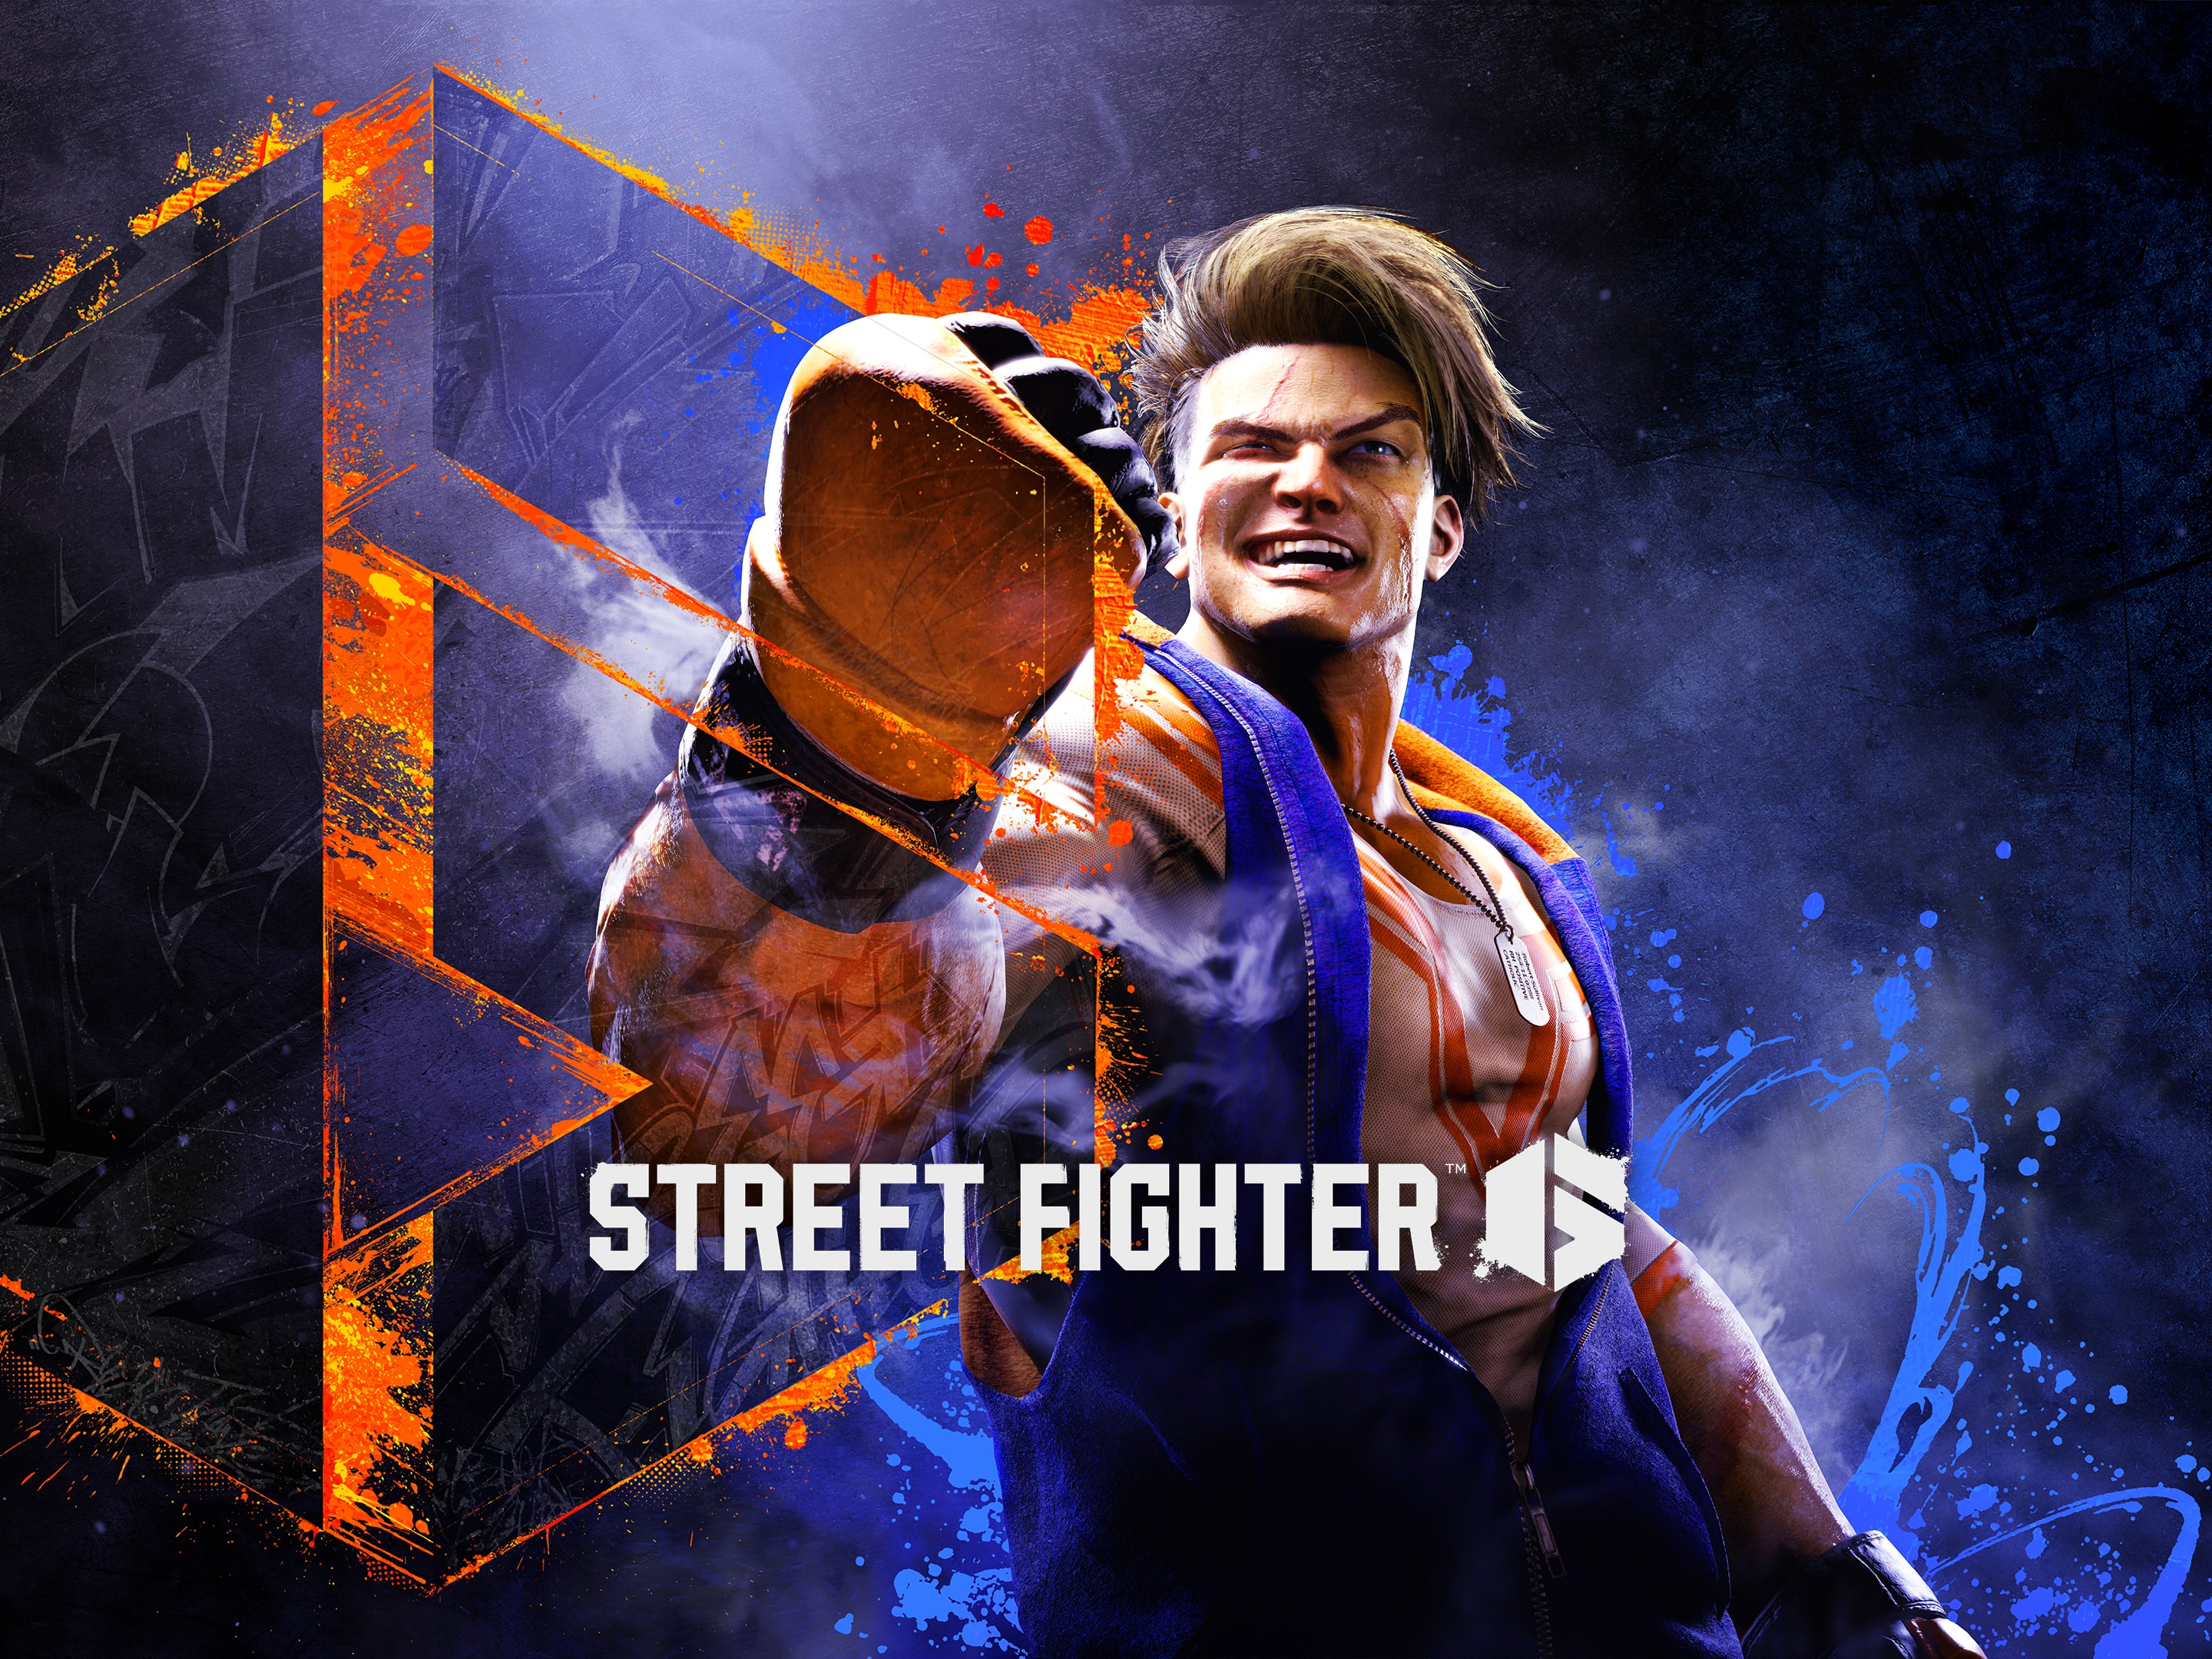 DataBlitz - A NEW ERA OF STREET FIGHTER! Pre-orders for Street Fighter 6  Standard Ed. (PS4/PS5/XBX), Street Fighter 6 Steelbook Ed. (PS4/PS5) and Street  Fighter 6 Collectors Ed. (PS5) are now being